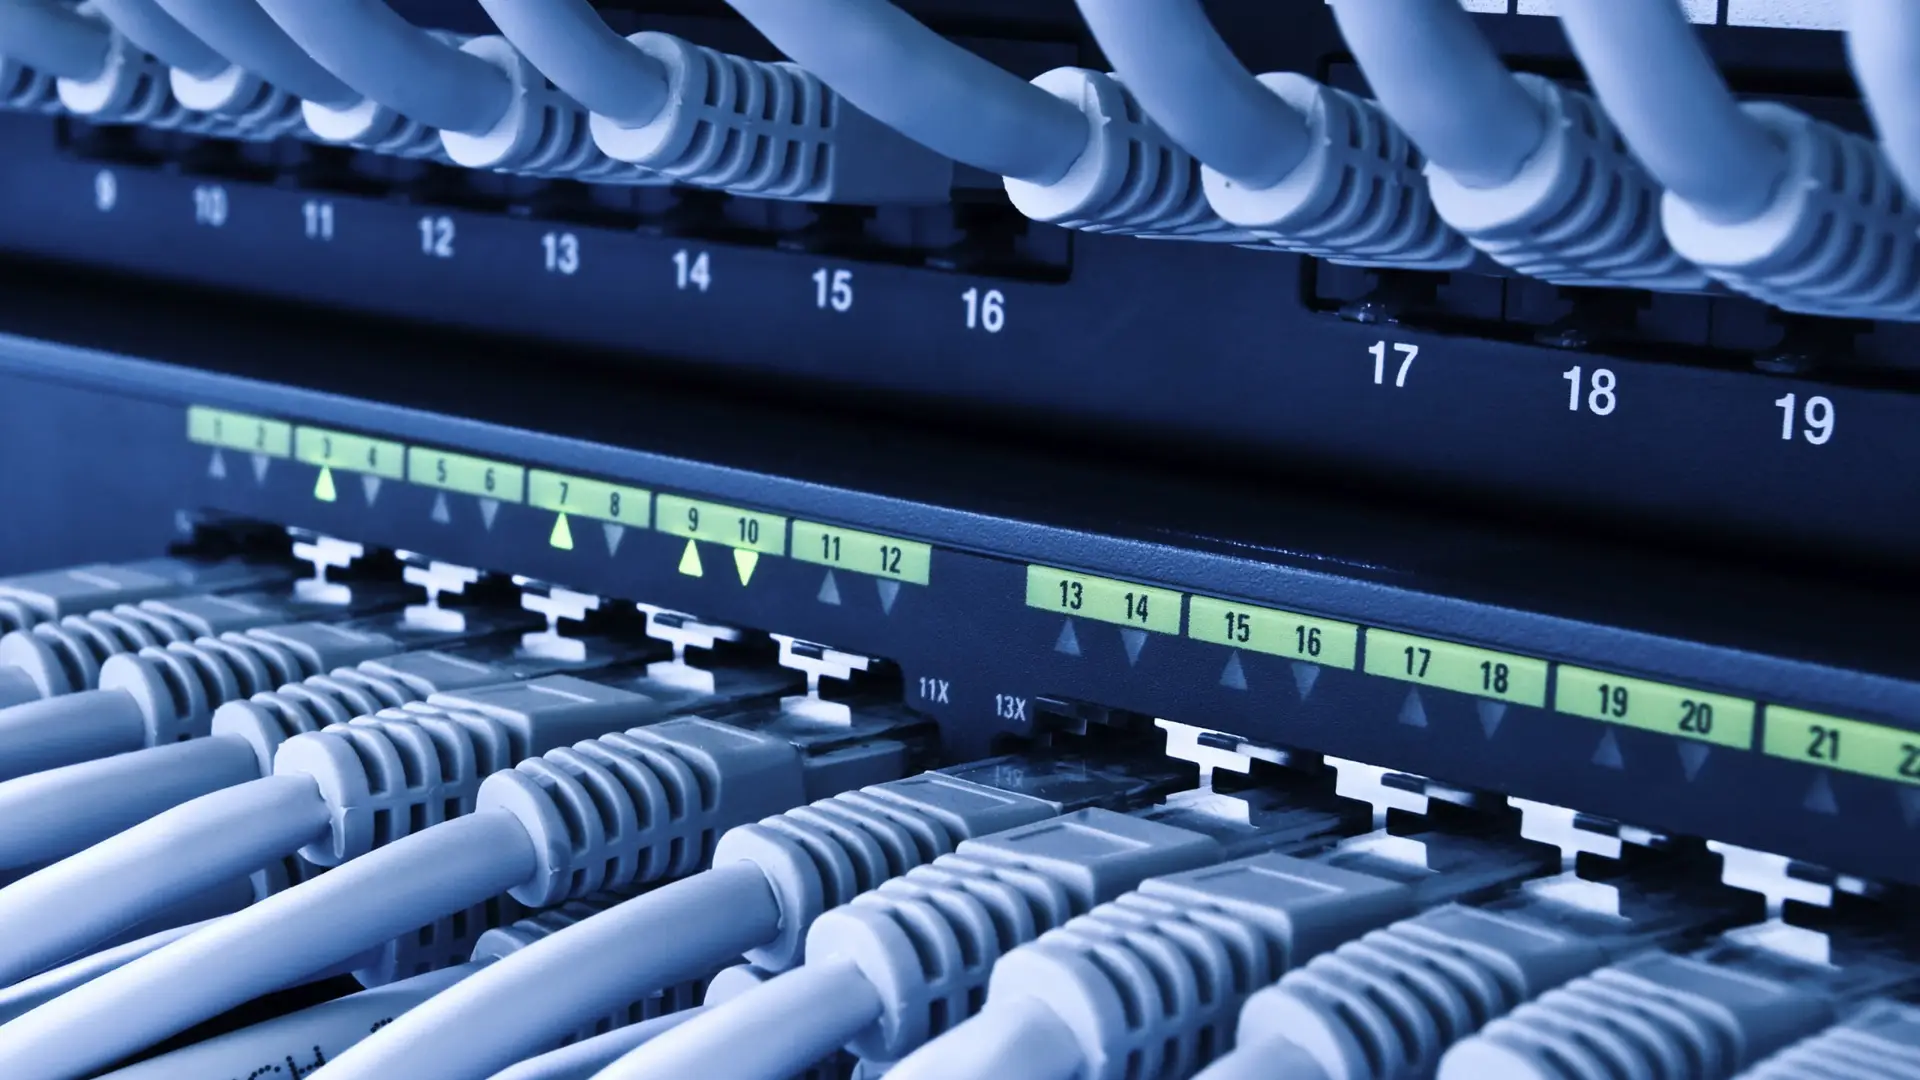 EFFICIENT STRATEGIES FOR YOUR NETWORK INFRASTRUCTURE